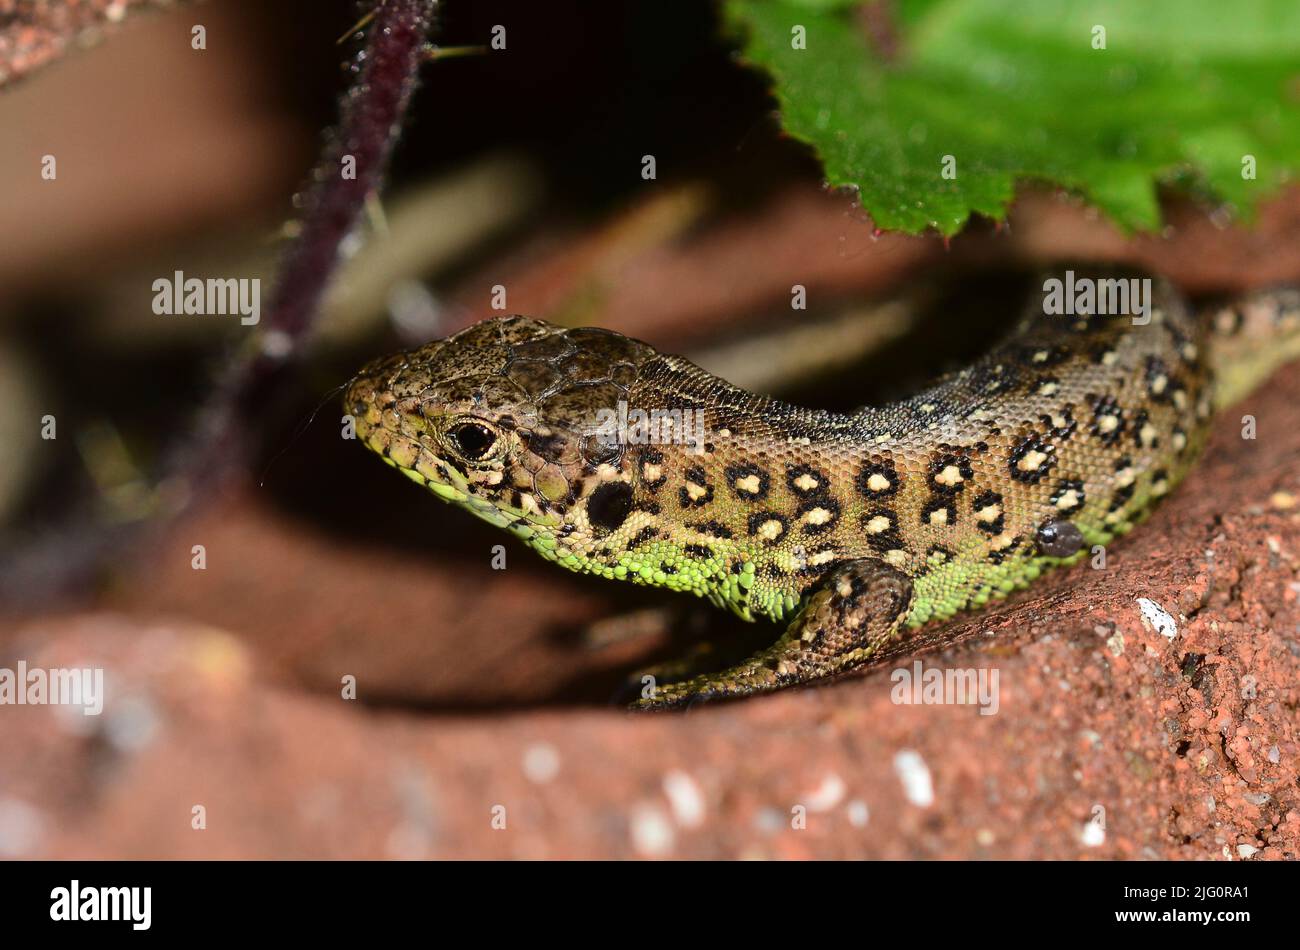 Adult male sand lizard in breeding condition basking on clay tile. Stock Photo